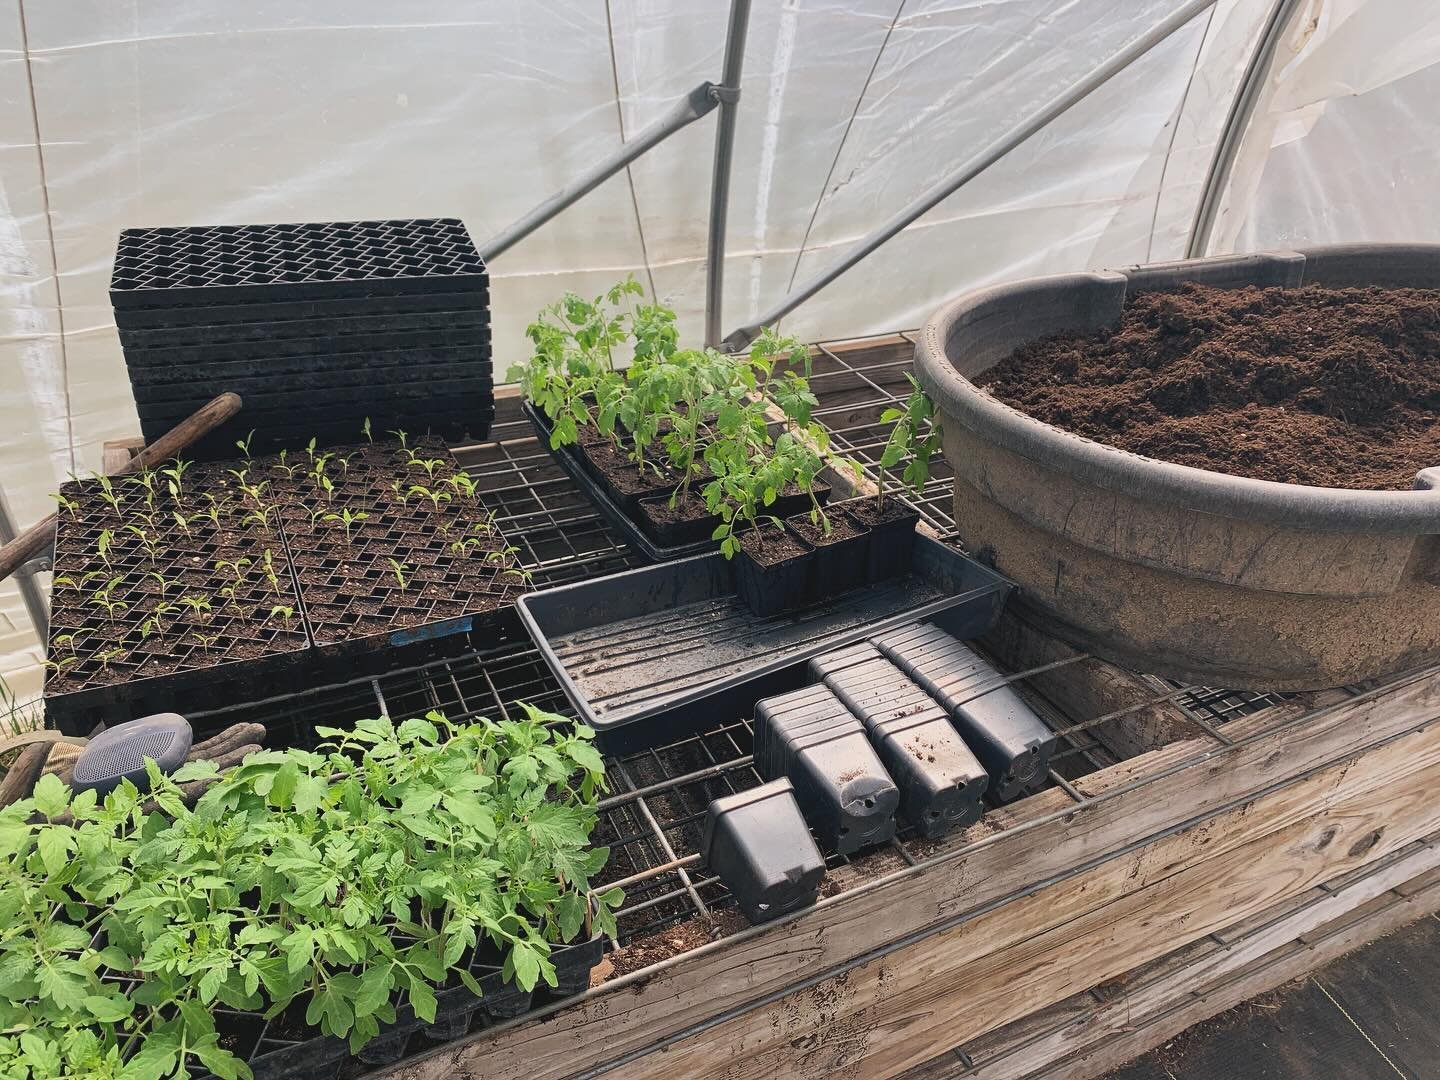 Potted up 50 cherry tomatoes and 150 picnic peppers on this gorgeous spring day. It won&rsquo;t be long until these babies are transplanted and producing fooooood 😇

#vermontfarm #pottingup #organicveggies #organictomatoes #organicpeppers #newfarmer